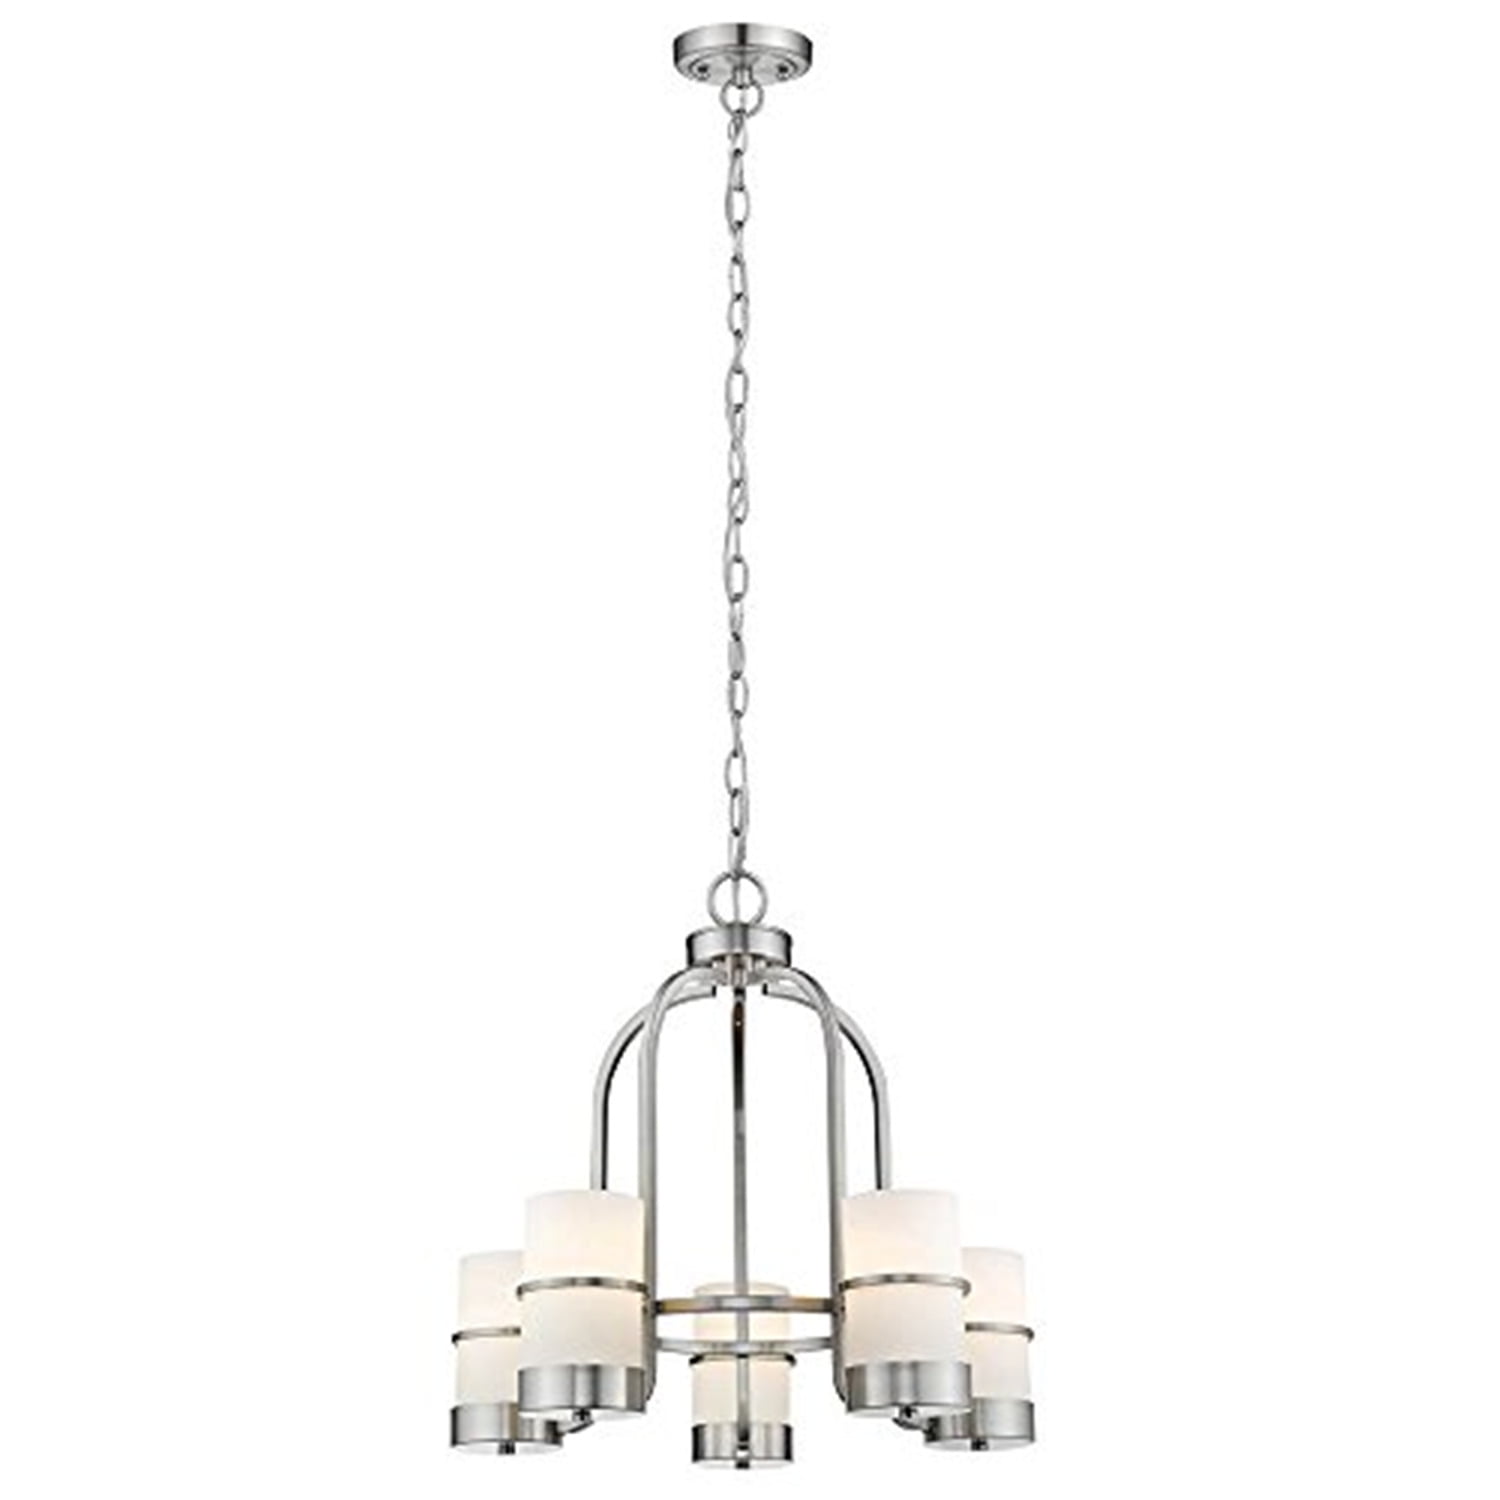 Ch2r001bn22-uc5 Penelope Contemporary 5 Light Brushed Nickel Mini Chandelier - 22 In.